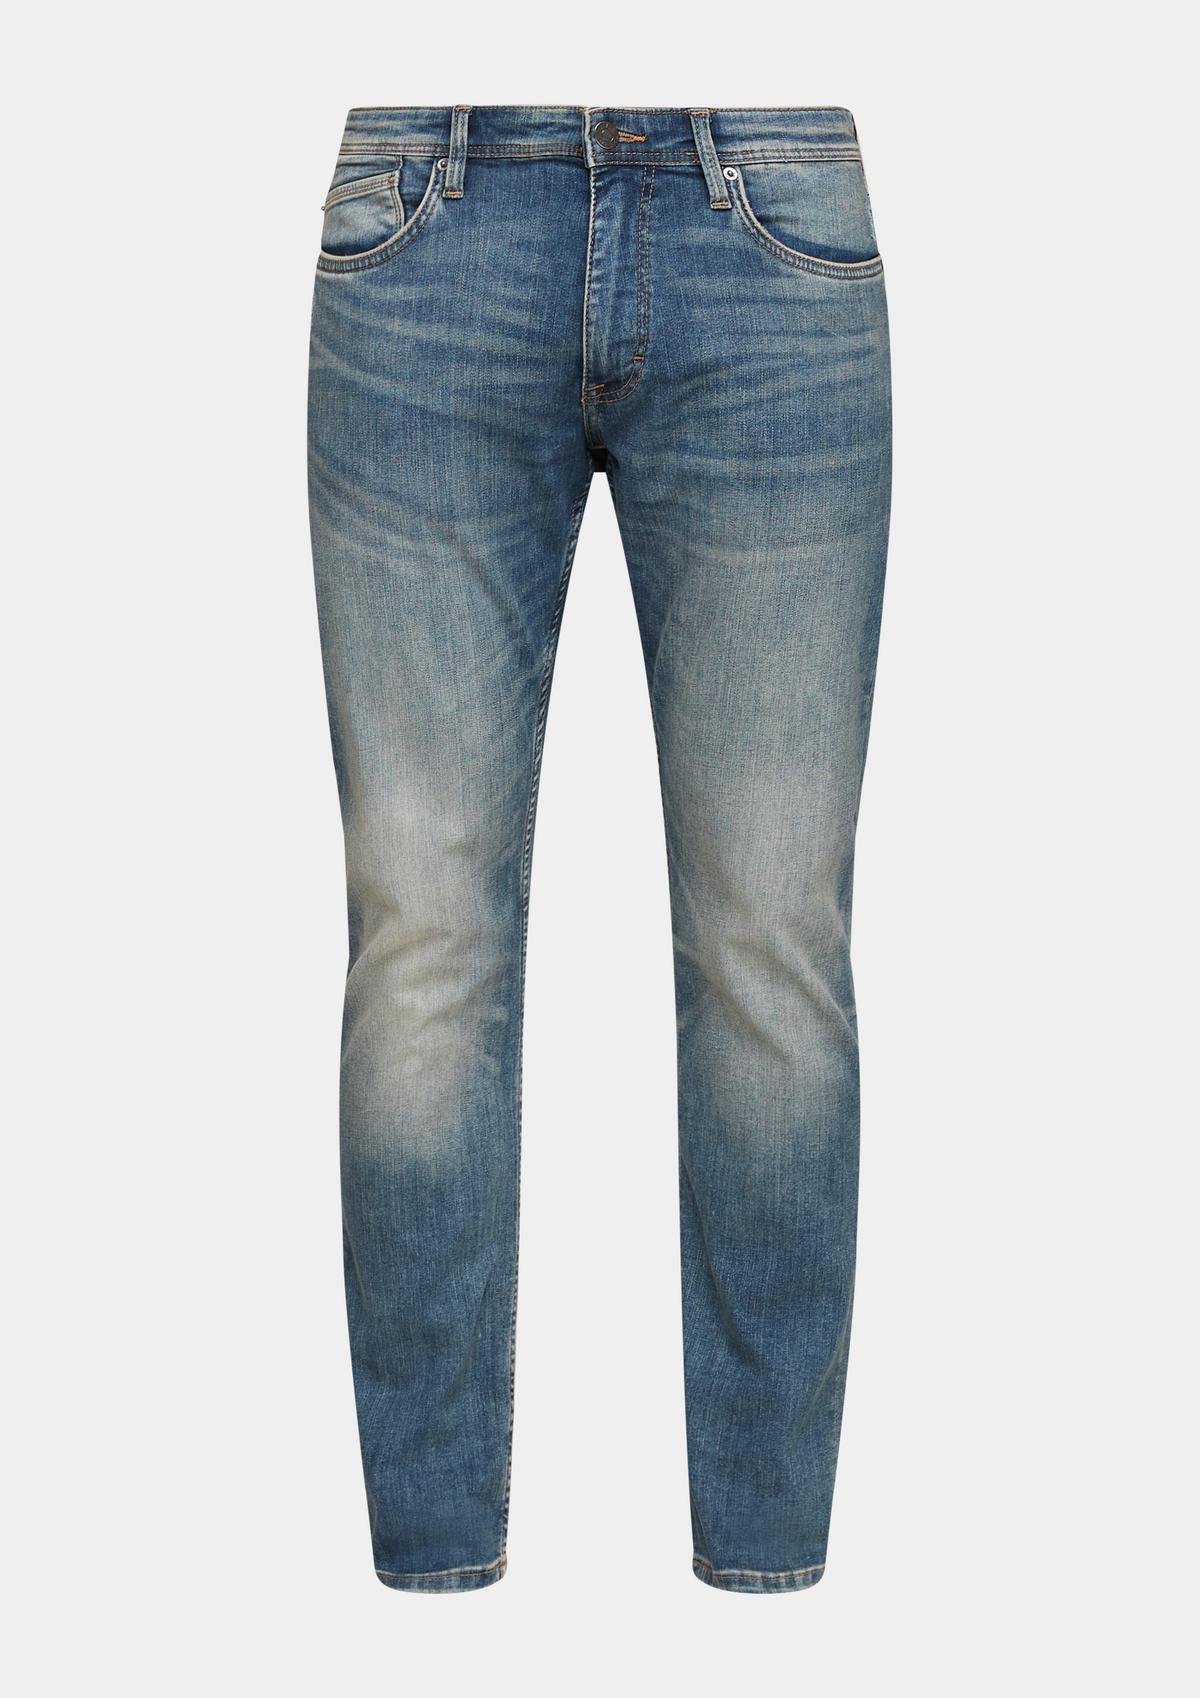 s.Oliver Jeans Keith / Slim Fit / Mid Rise / Slim Leg